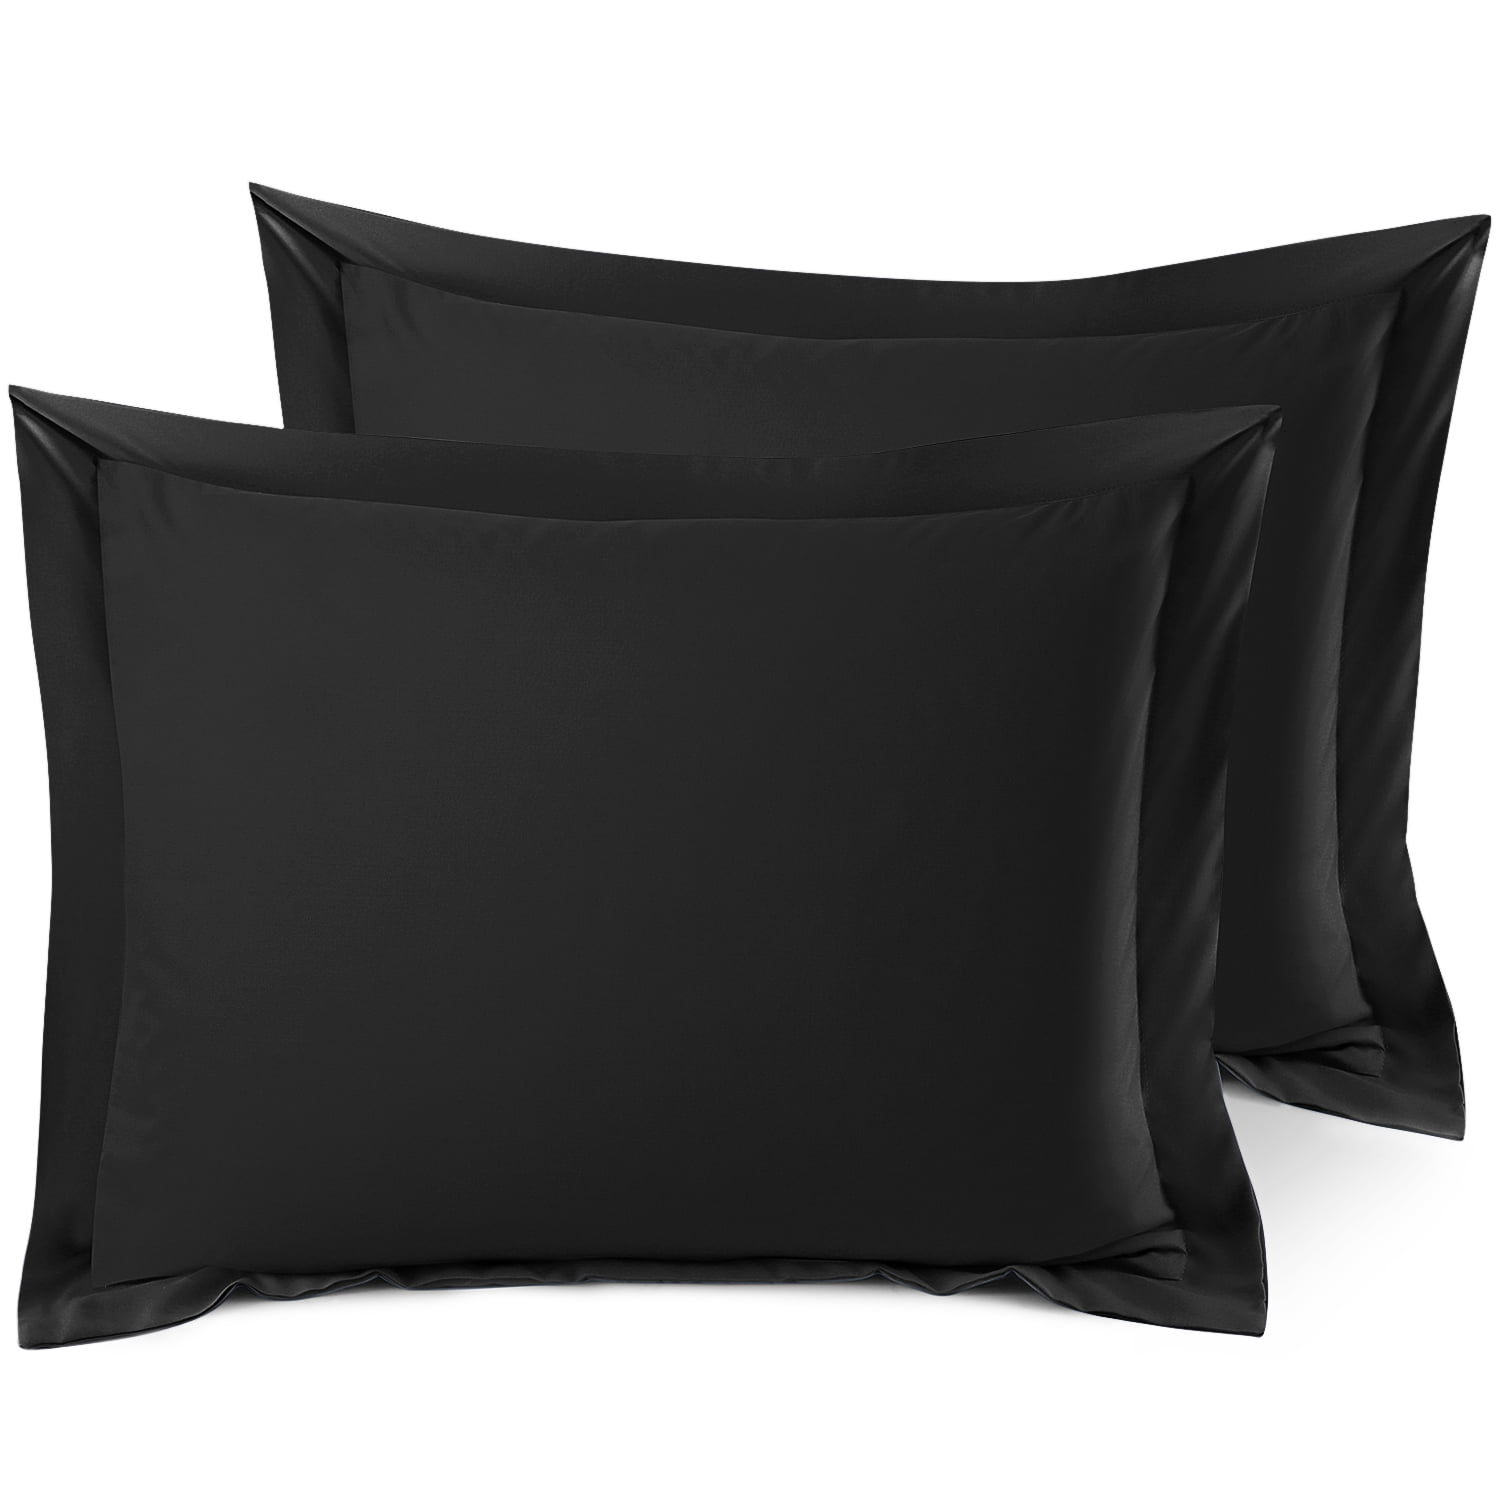 Set of 2 Standard 20"x26" Size Pillow Shams Black, Hotel Luxury Soft Double Brushed Microfiber, Hypoallergenic, Bed Pillow Cases Cover